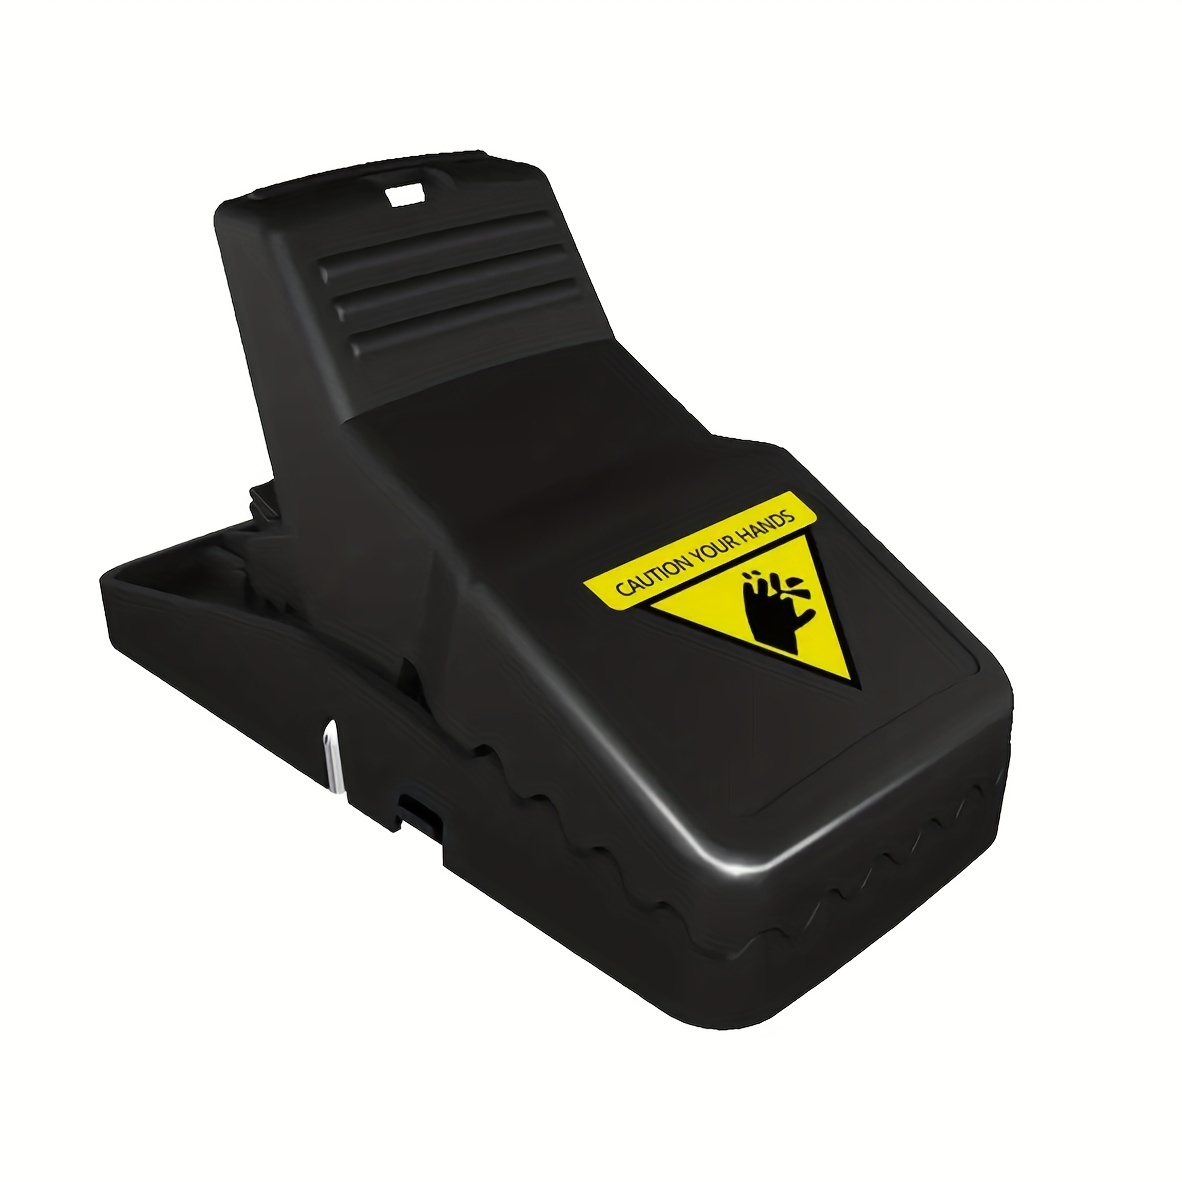 Mouse Traps, Indoor Small Size, Fast Effective, Hygienic And Safe